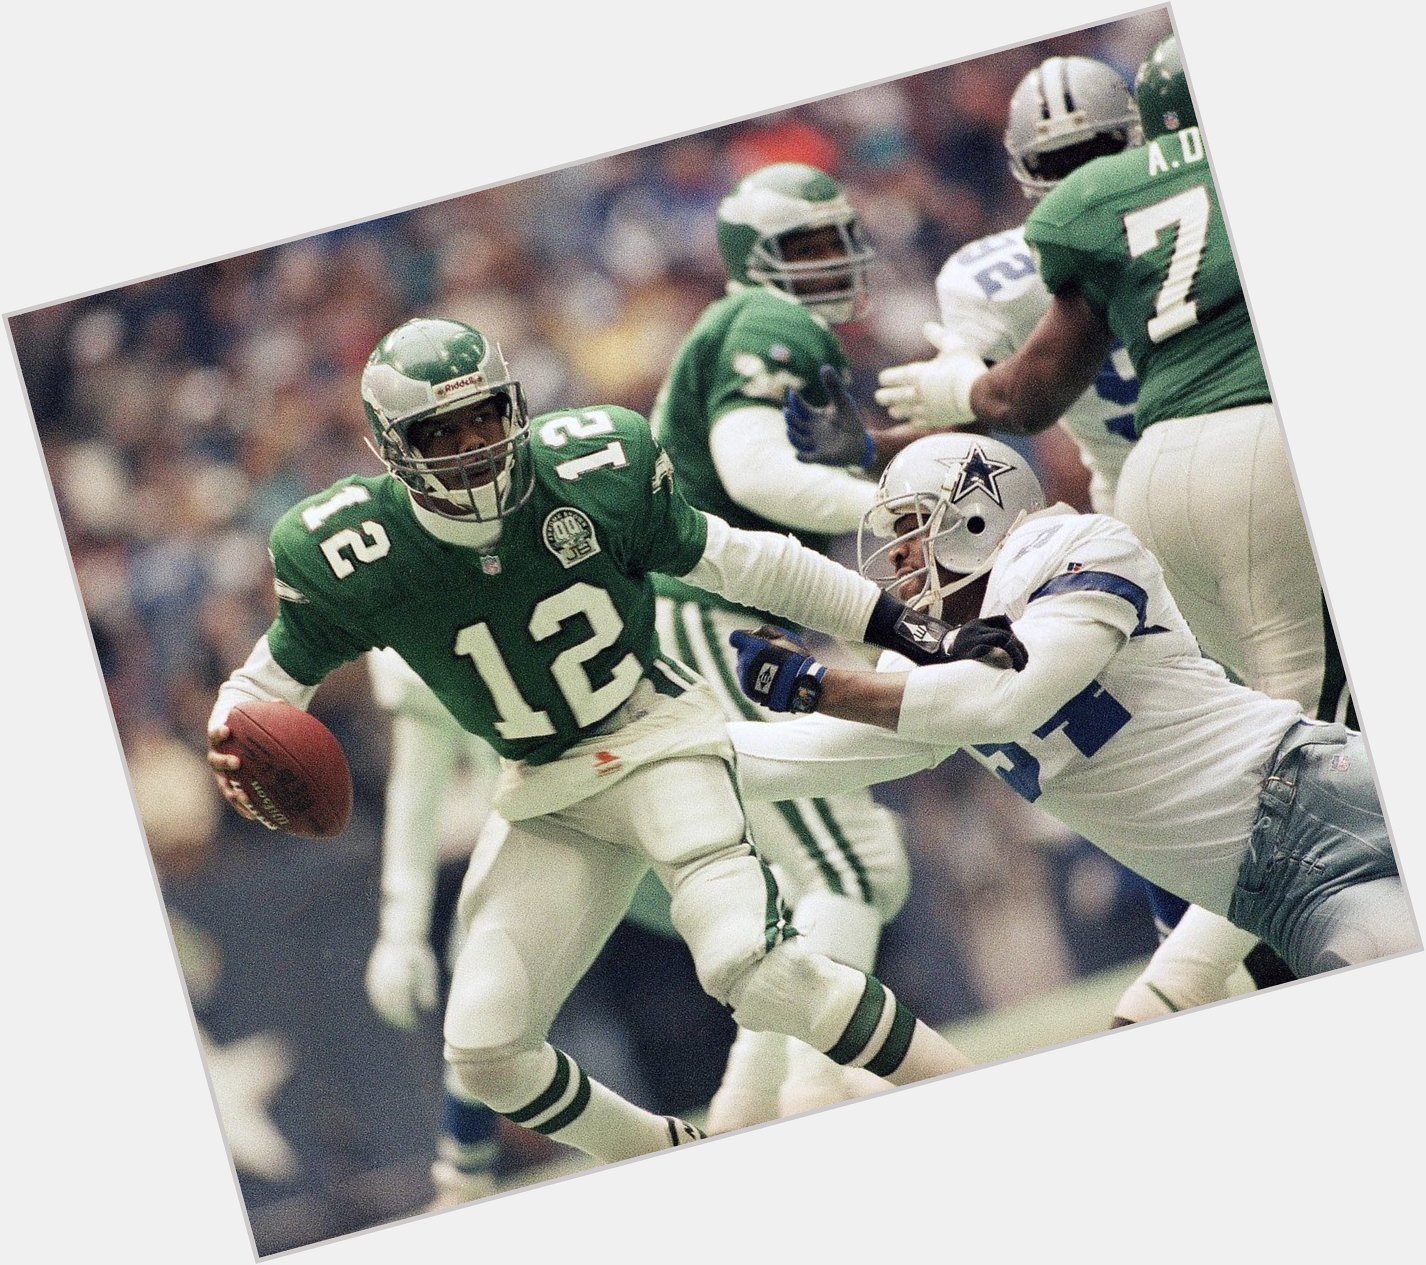 Happy Birthday Pastor Randall Cunningham.  And thank you for the memories! 